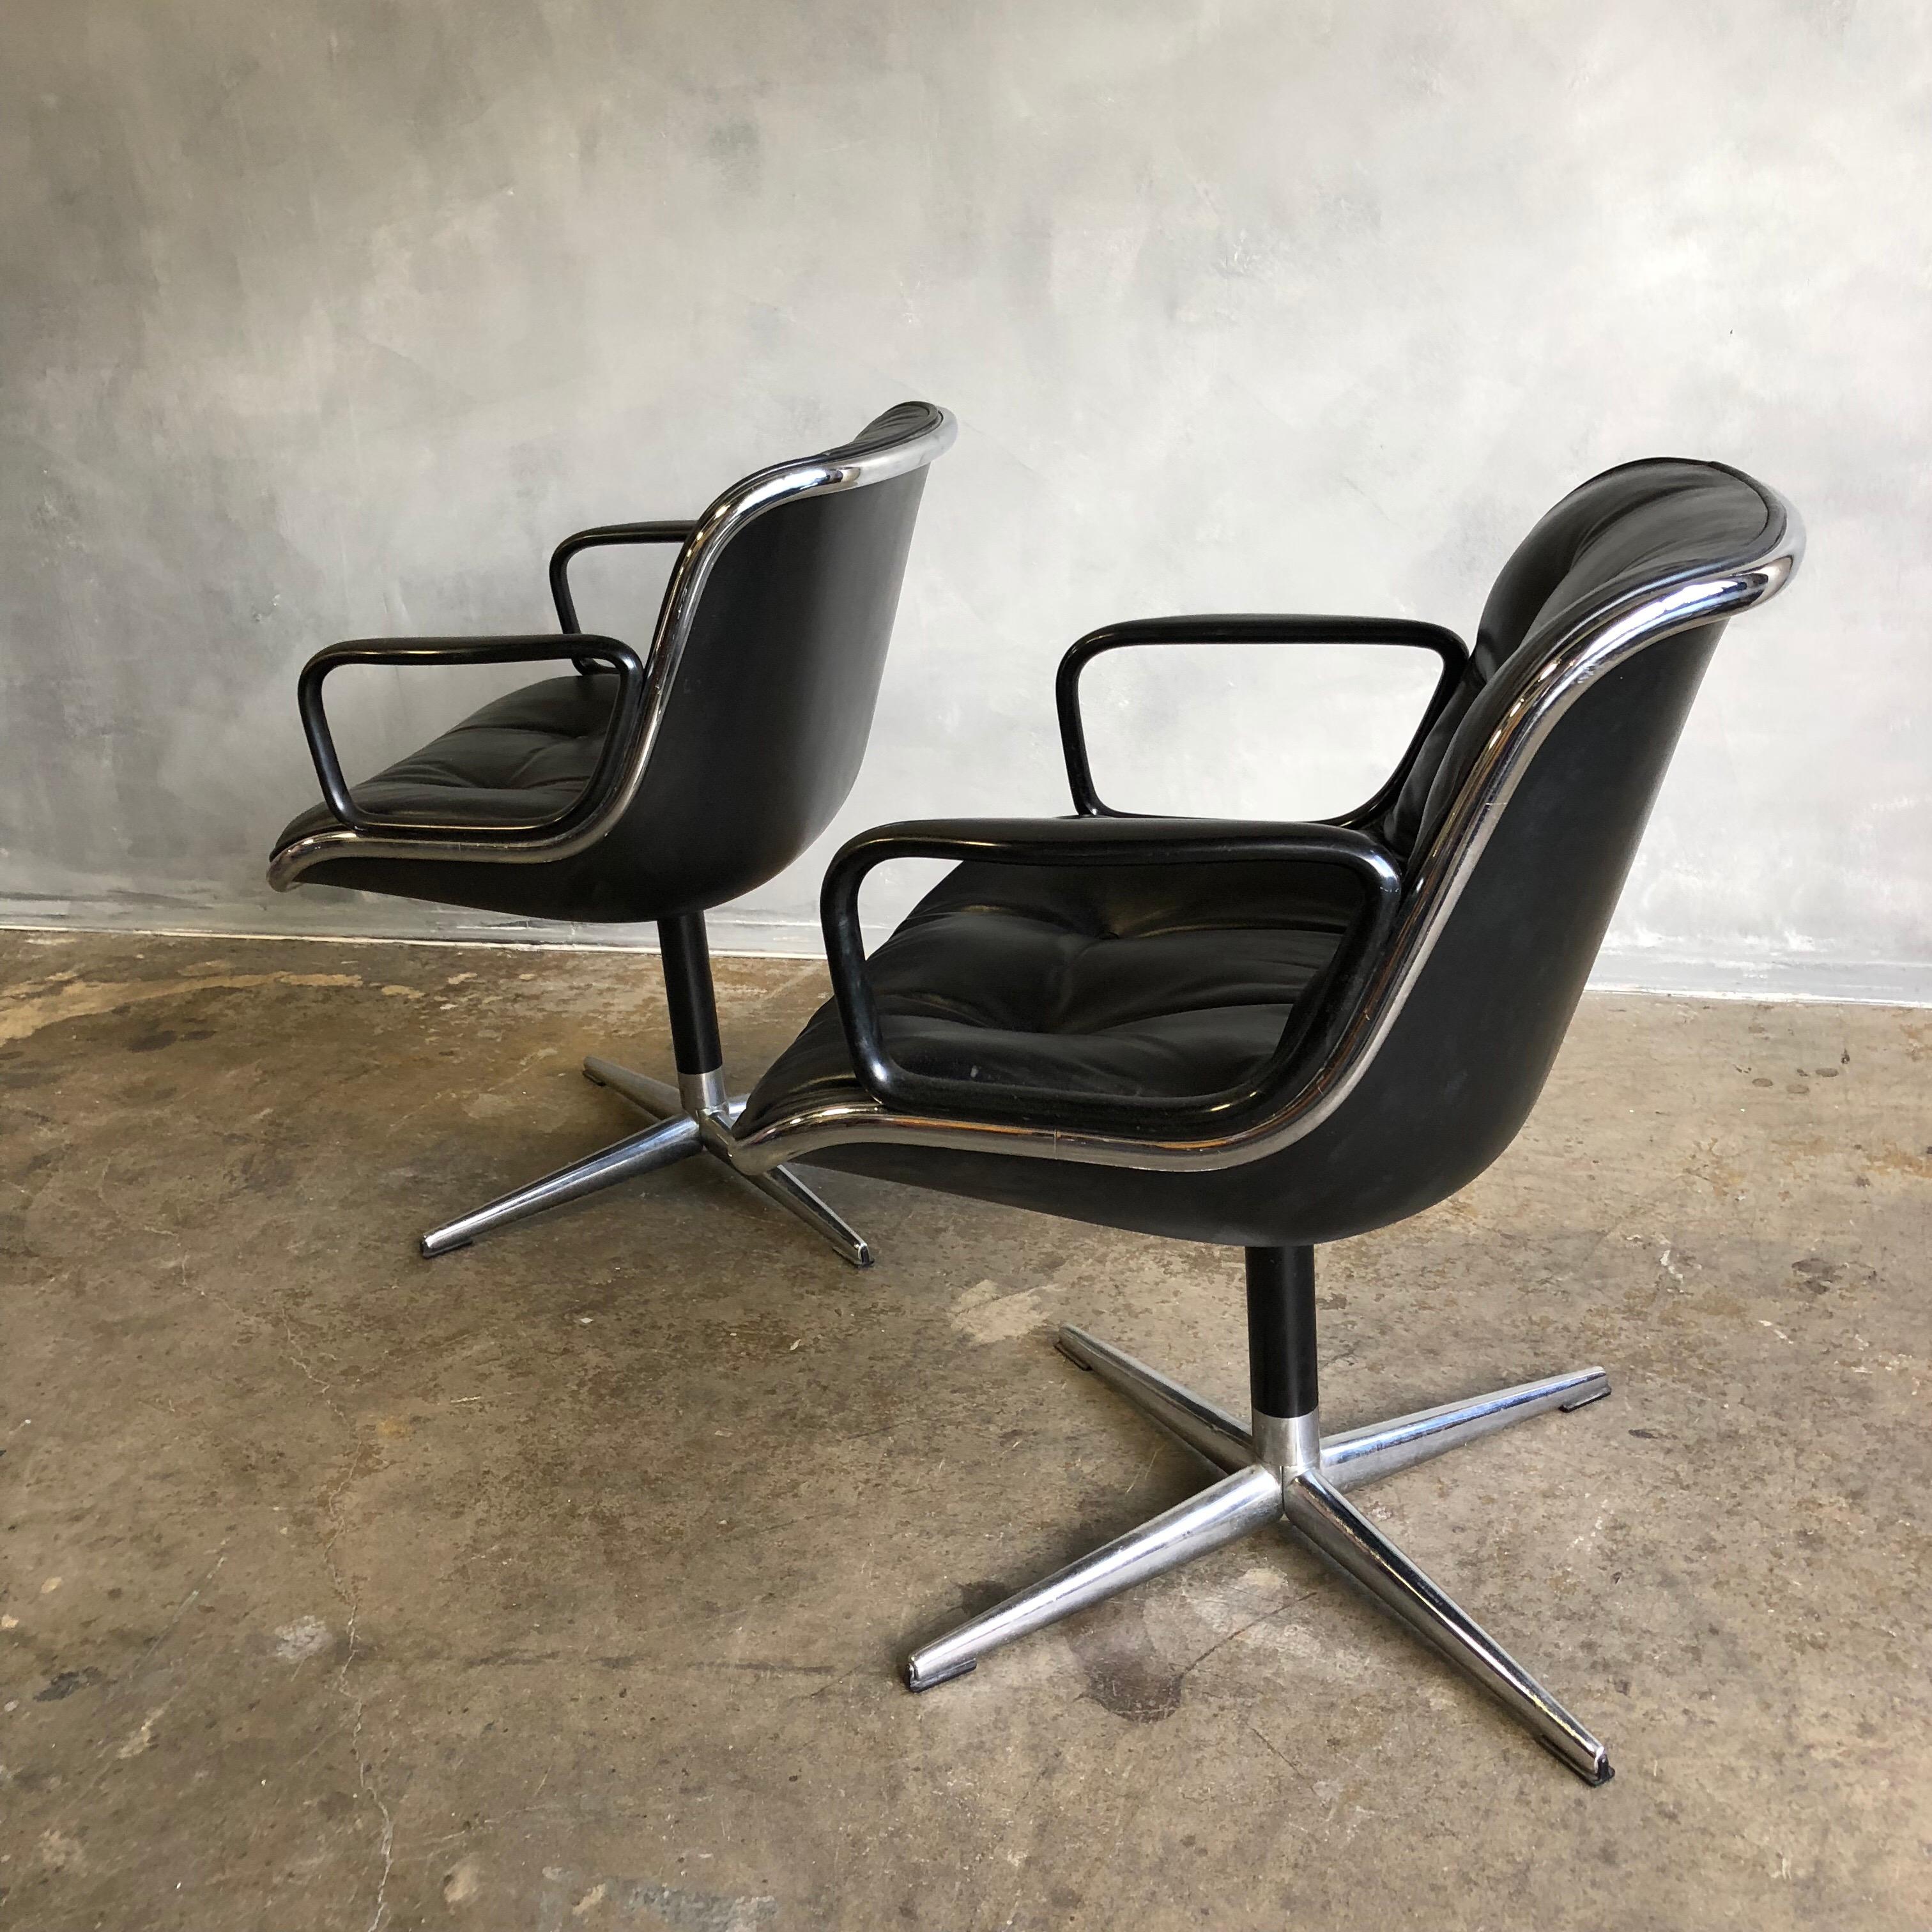 For you consideration is a pair of vintage Charles Pollock for Knoll accent chairs. These chairs are icons of Mid-Century Modern design and have been in continuous production by Knoll since their introduction in 1963. The architecture of the single